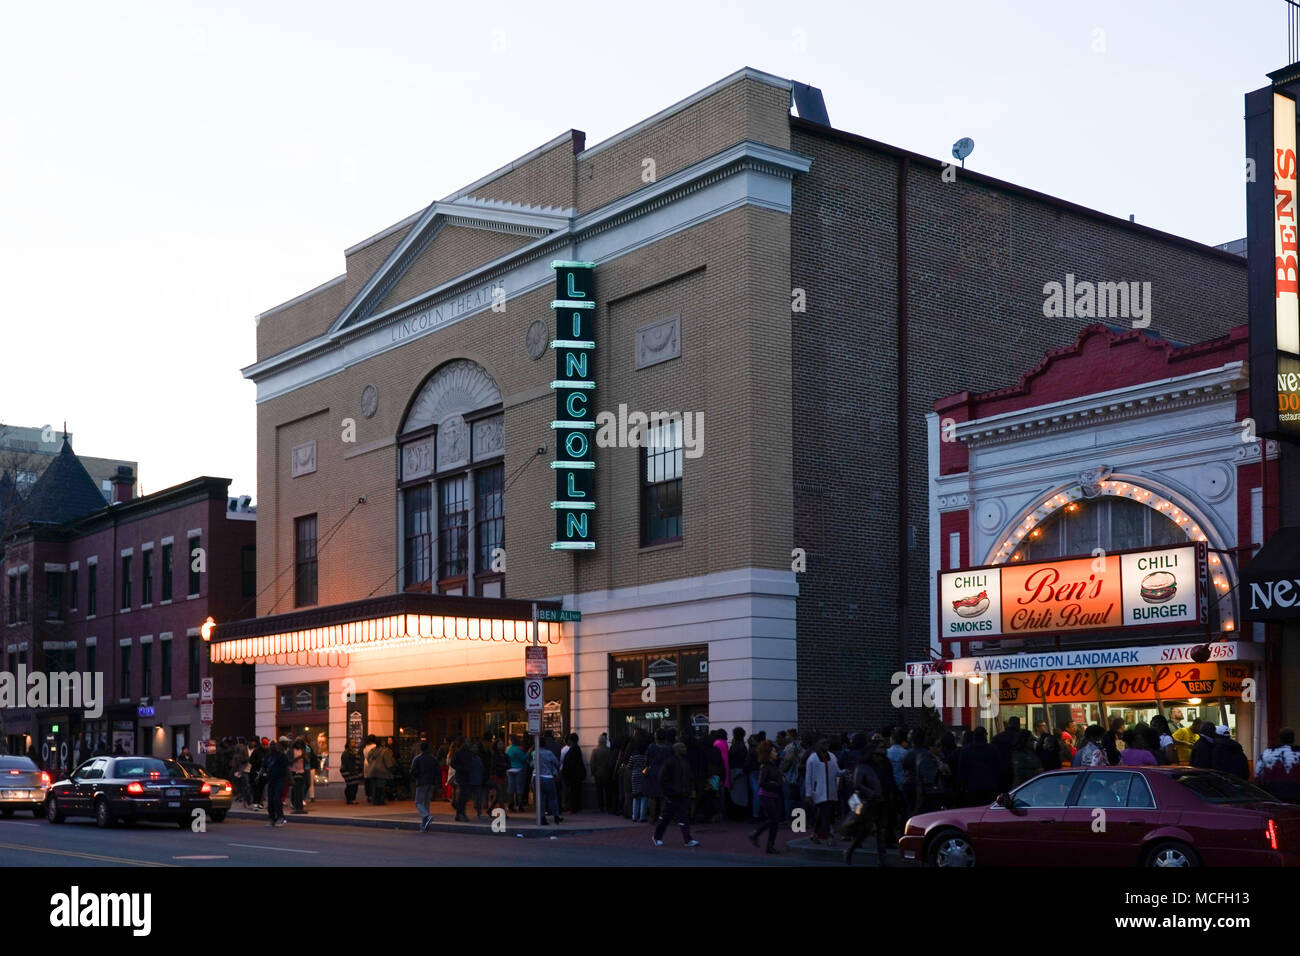 The Lincoln theatre in Washington DC in the United States. From a series of travel photos in the United States. Photo date: Sunday, April 1, 2018. Pho Stock Photo